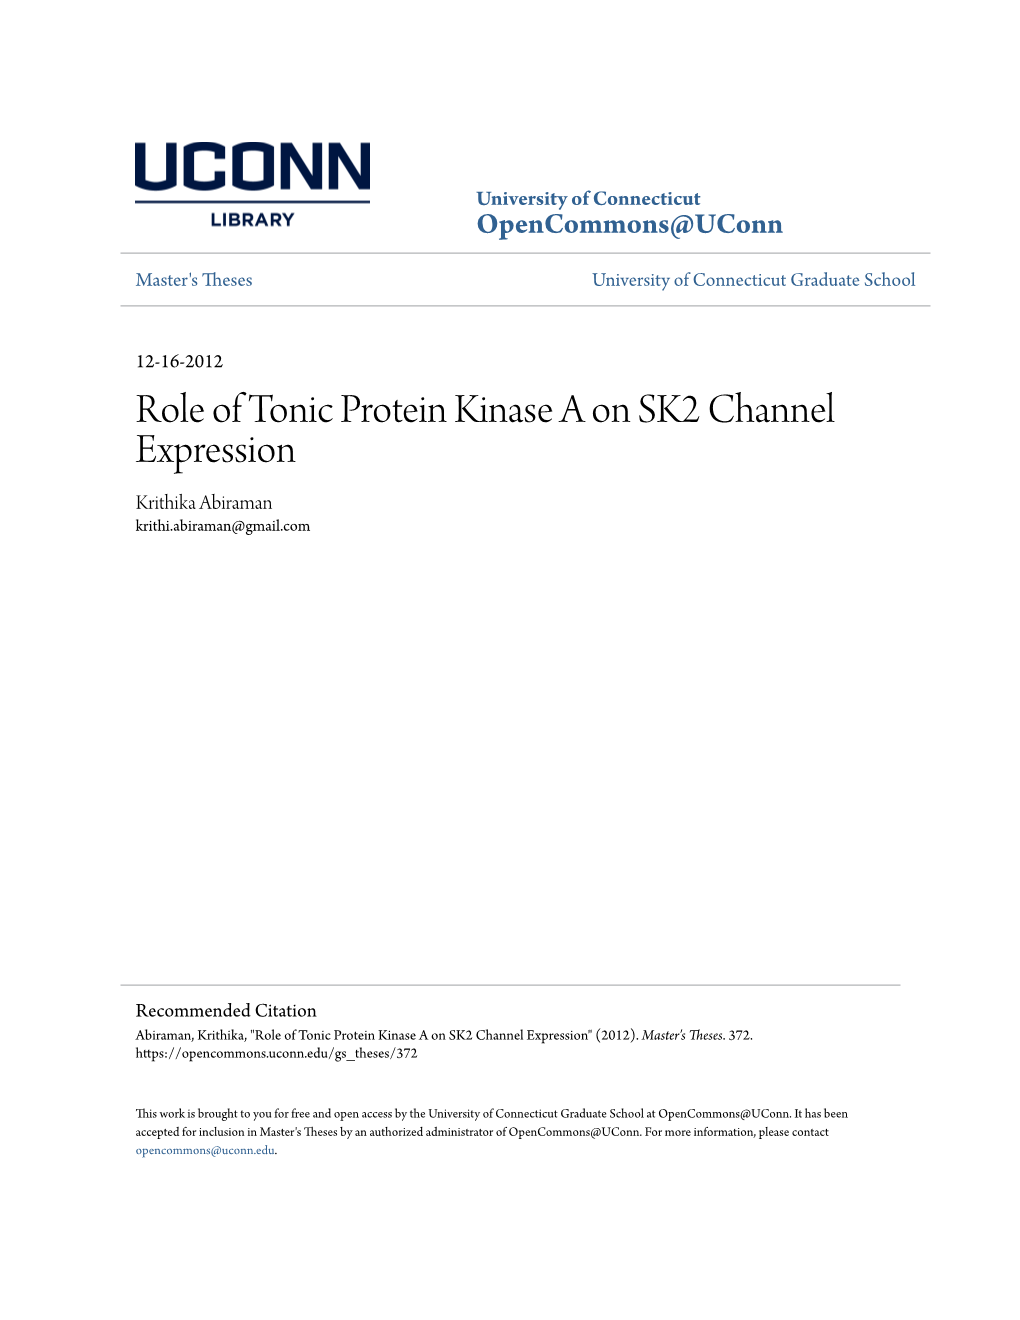 Role of Tonic Protein Kinase a on SK2 Channel Expression Krithika Abiraman Krithi.Abiraman@Gmail.Com